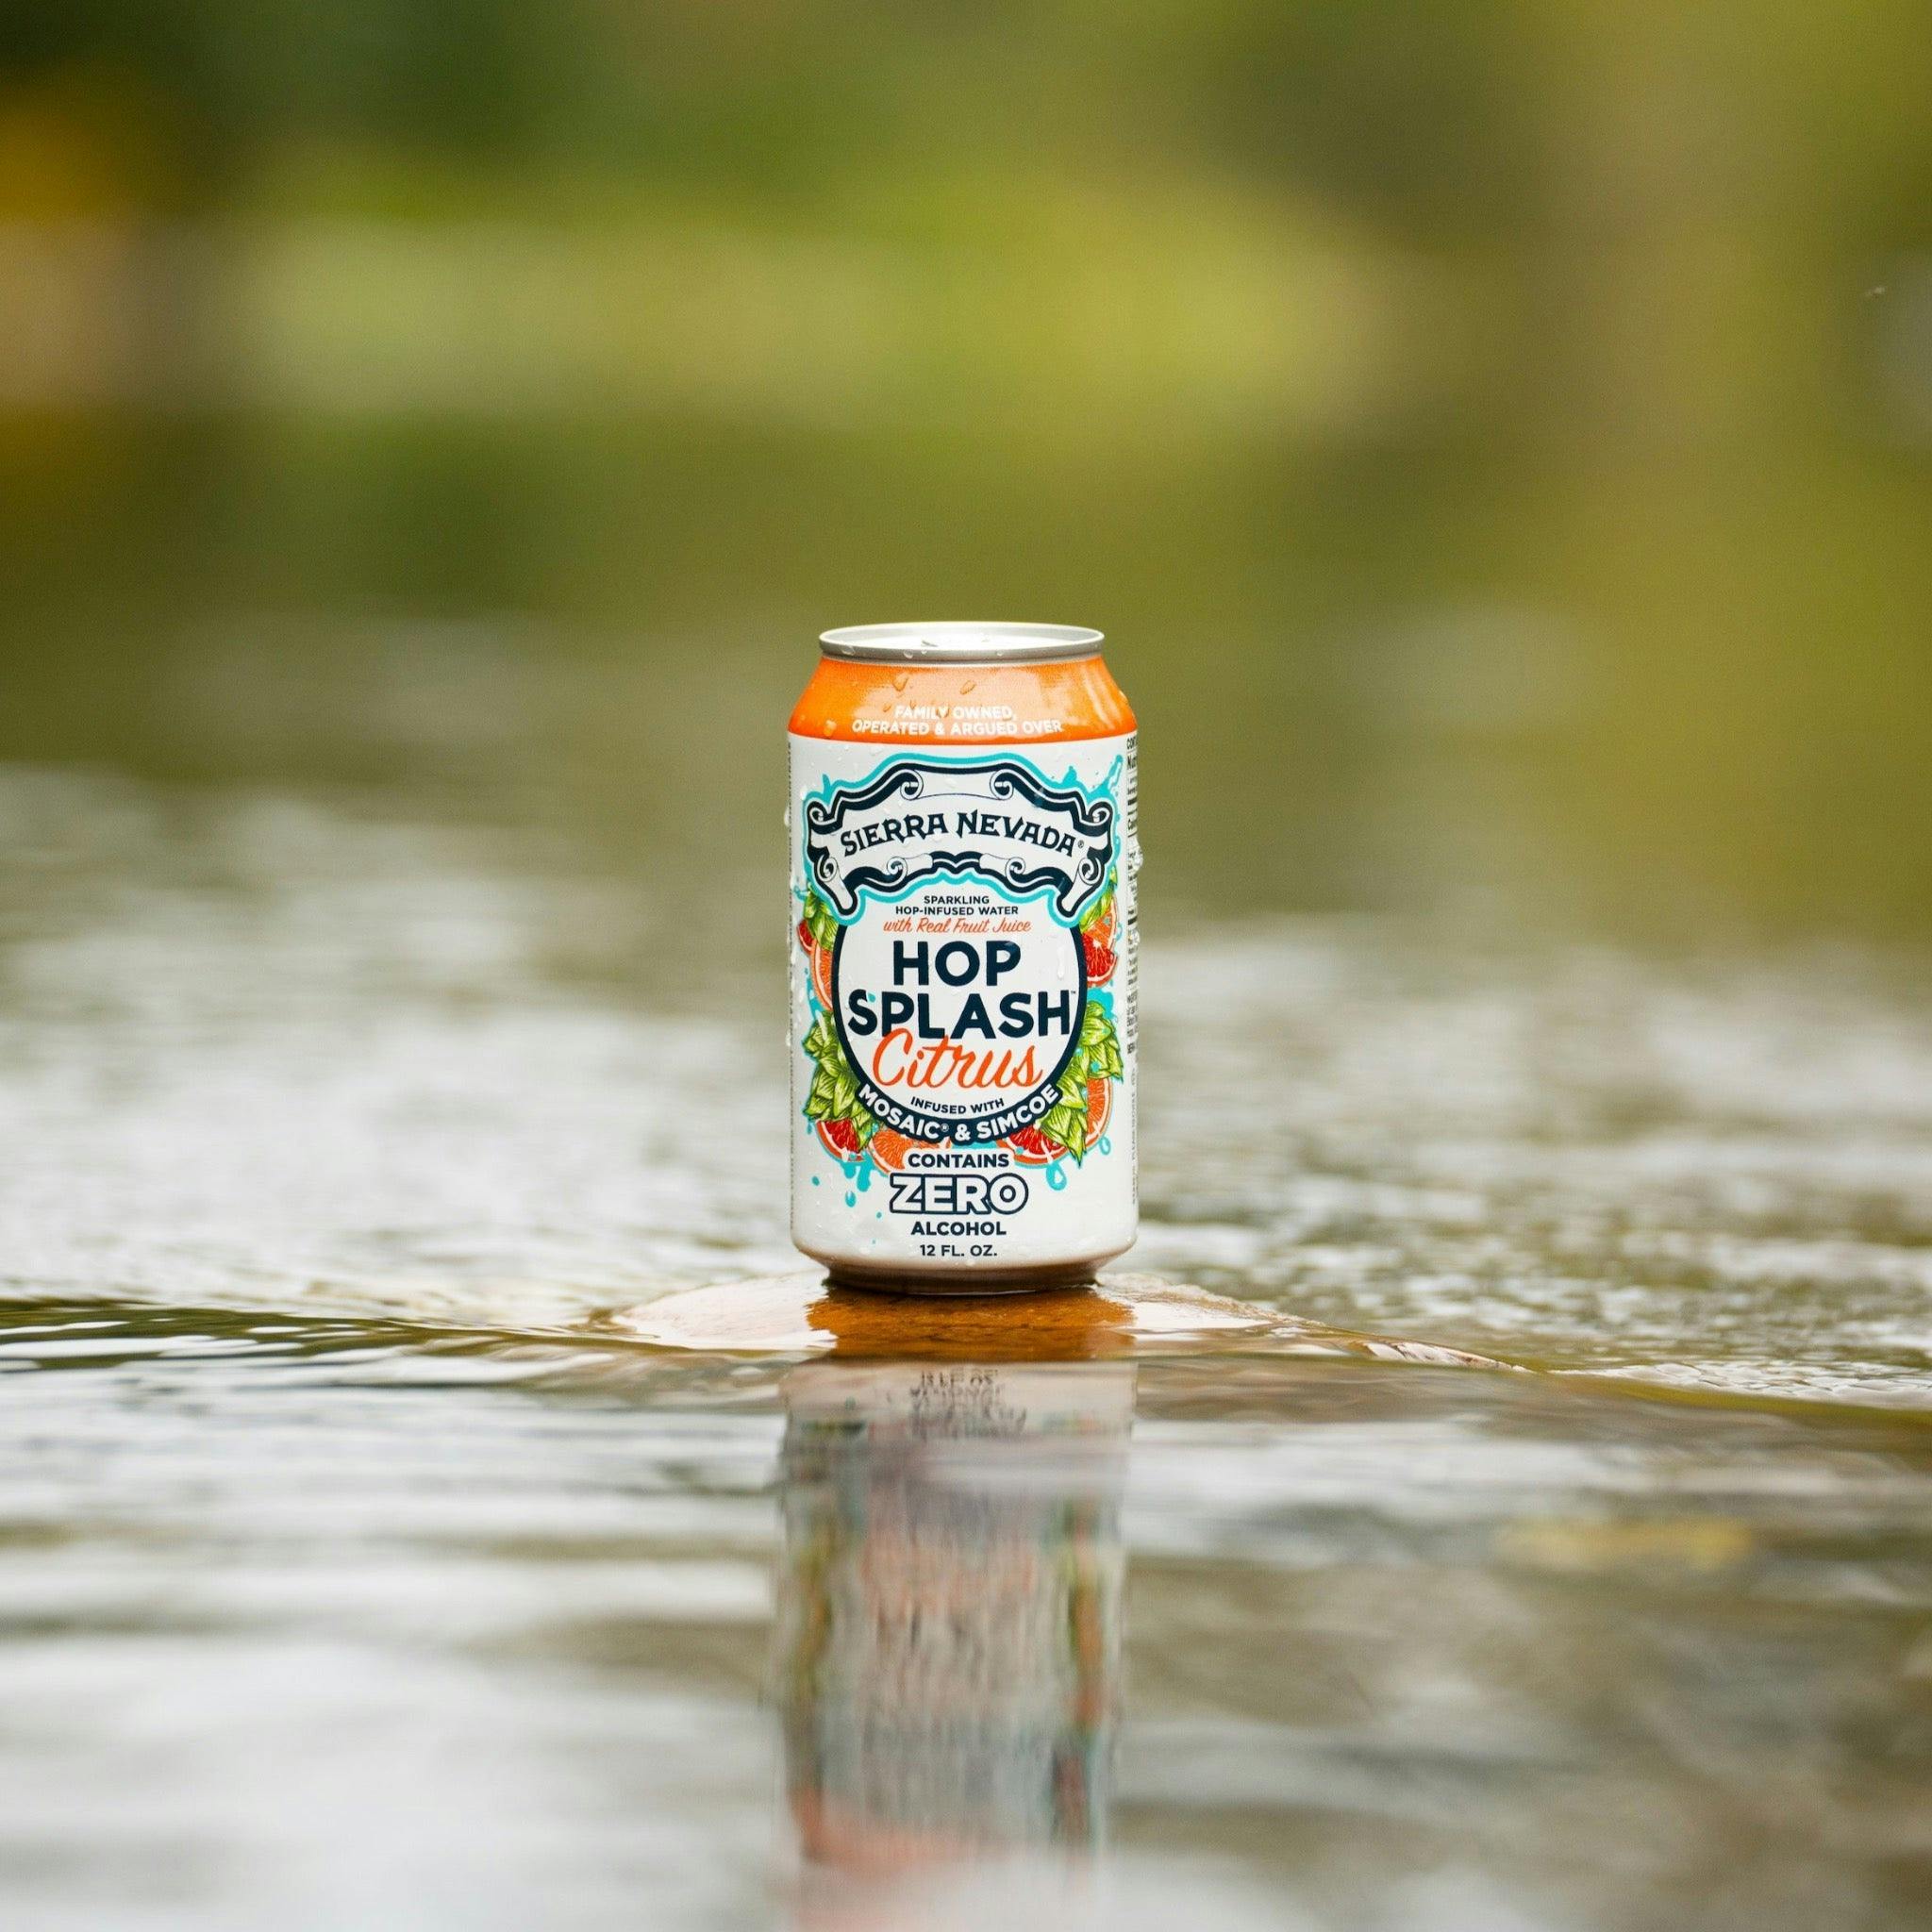 Sierra Nevada Brewing Co. Hop Splash Citrus Non-Alcoholic Sparkling Hop Water - A can of refreshing Hop Splash Citrus sits on a flat stone surrounded by a gently moving river